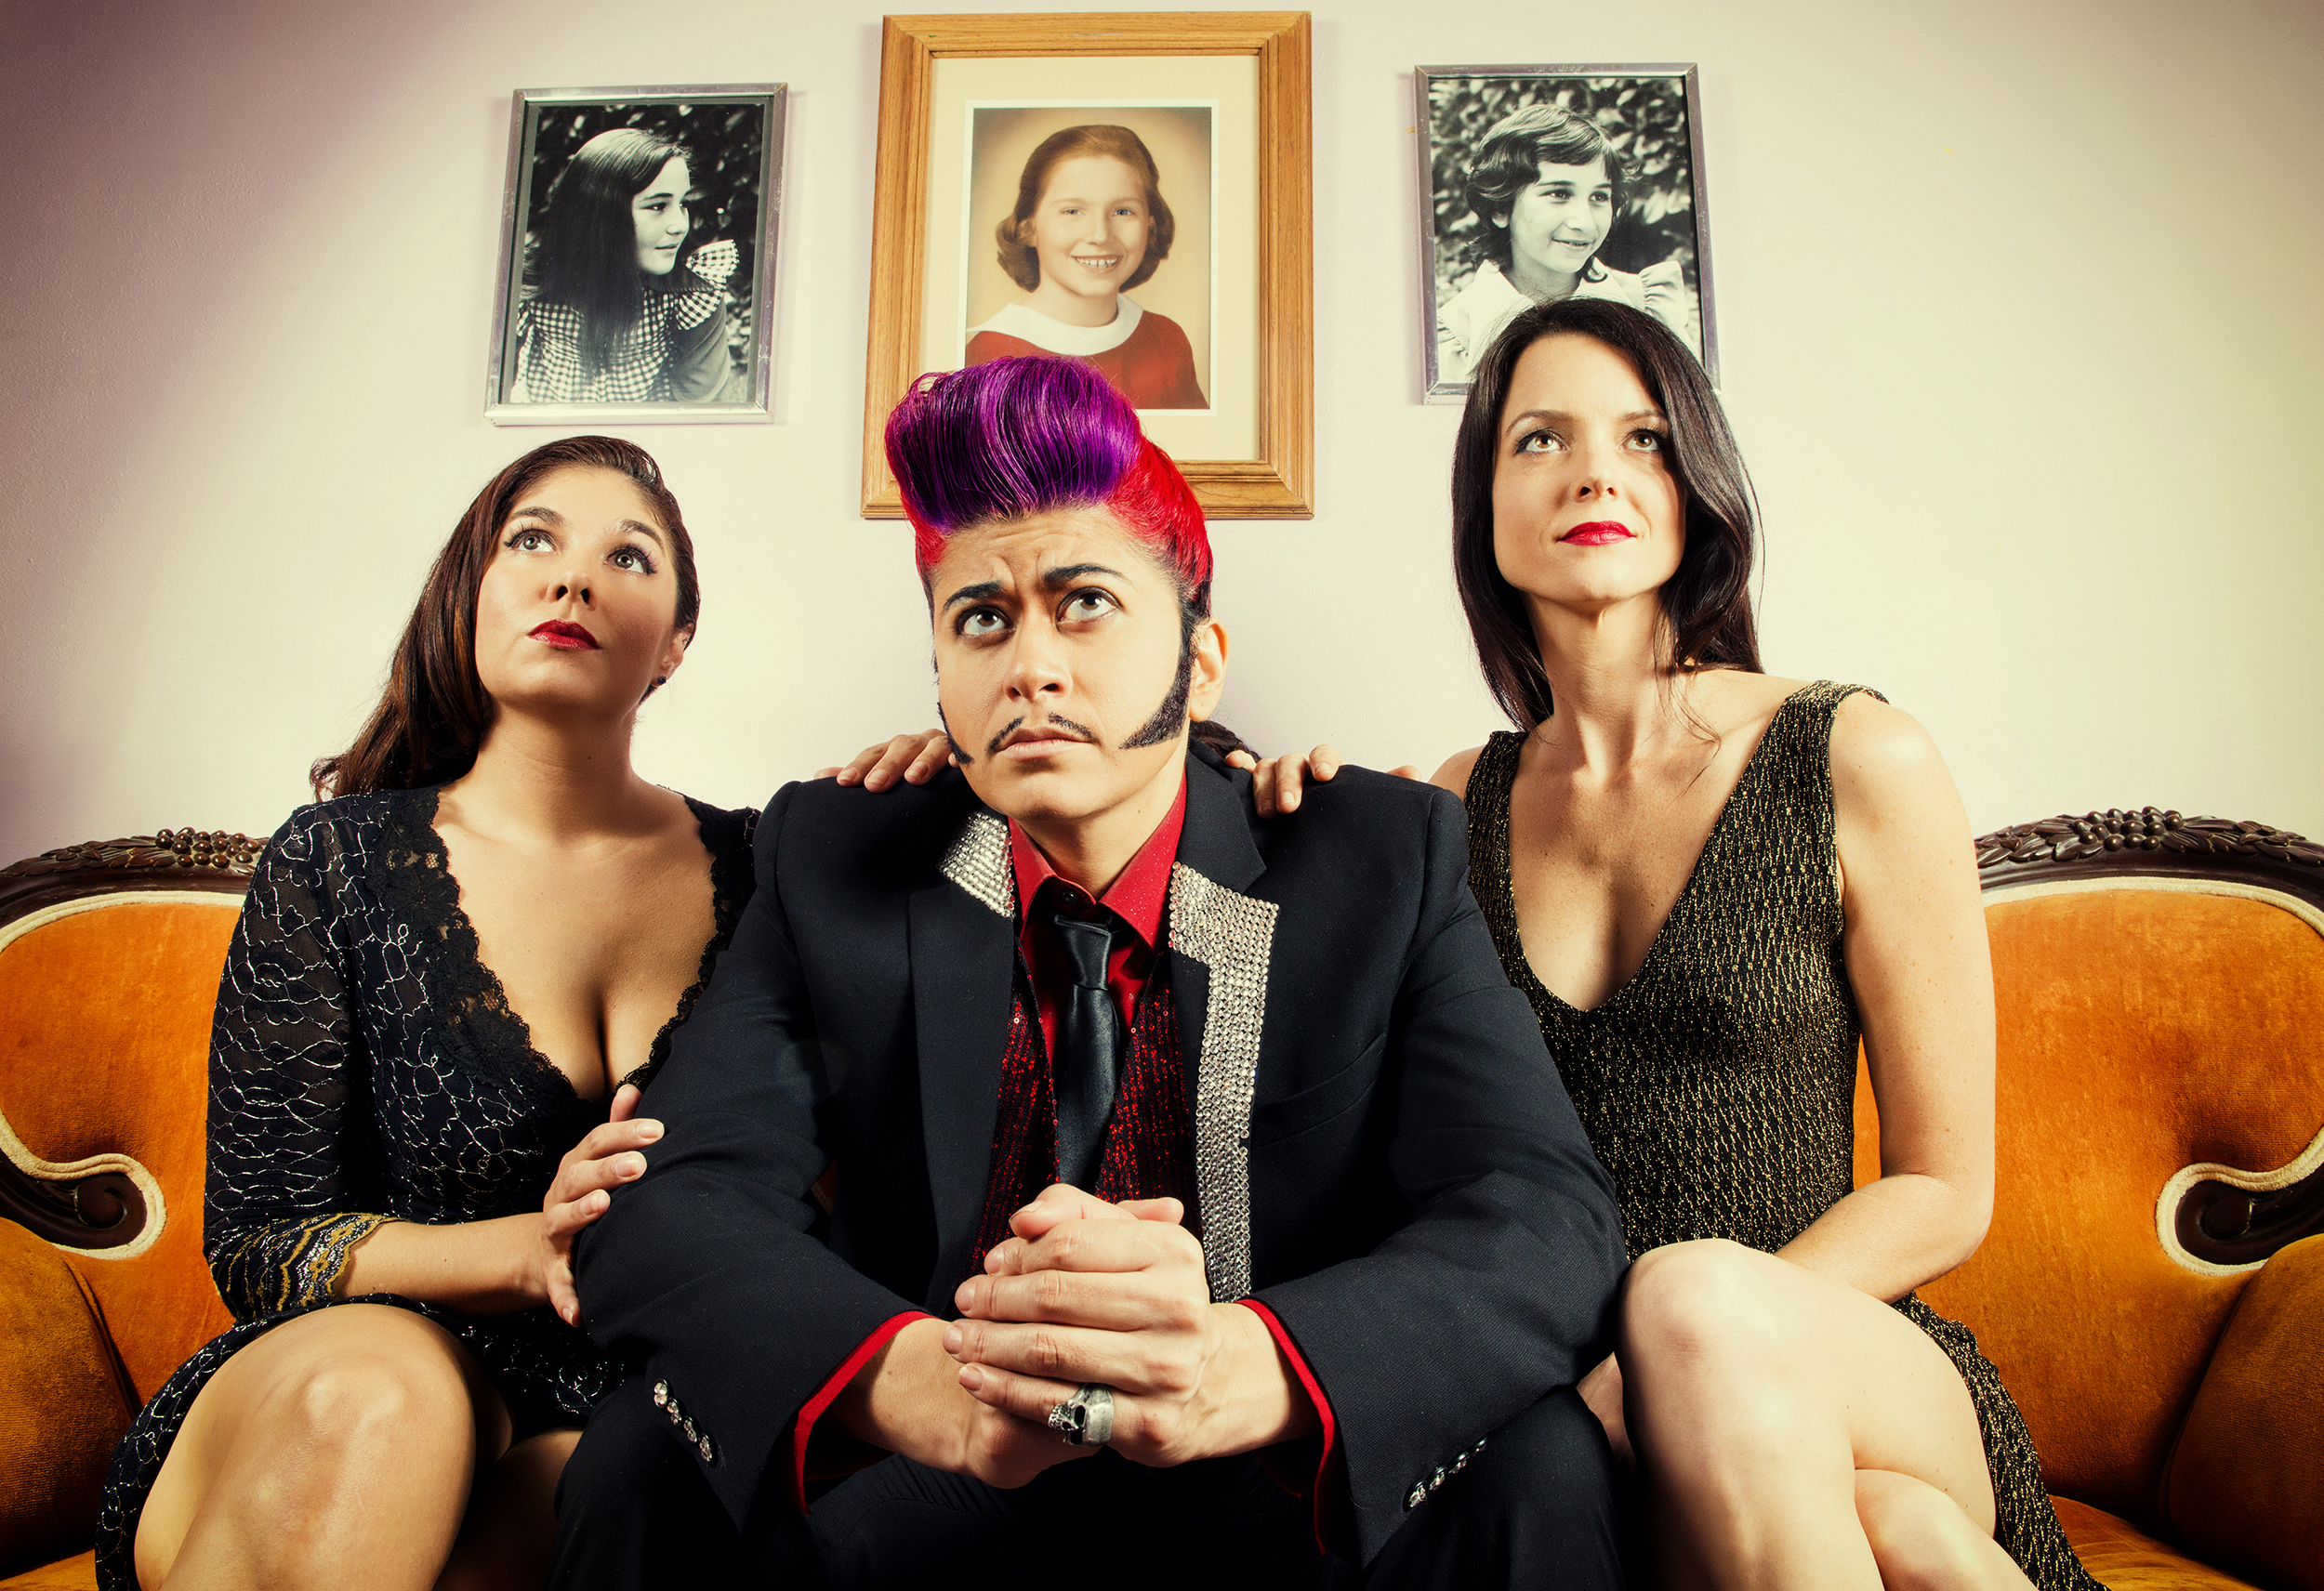  Trigger Mortis, aka Buck Wylde, sits between Carmel Sutra and Taylor Anne Ramsey at Texas Theatre in Dallas, TX.  Mortis worked as a corporate marketing professional by day before moonlighting as Buck Wylde, a suave, hyper-masculine drag king emcee.